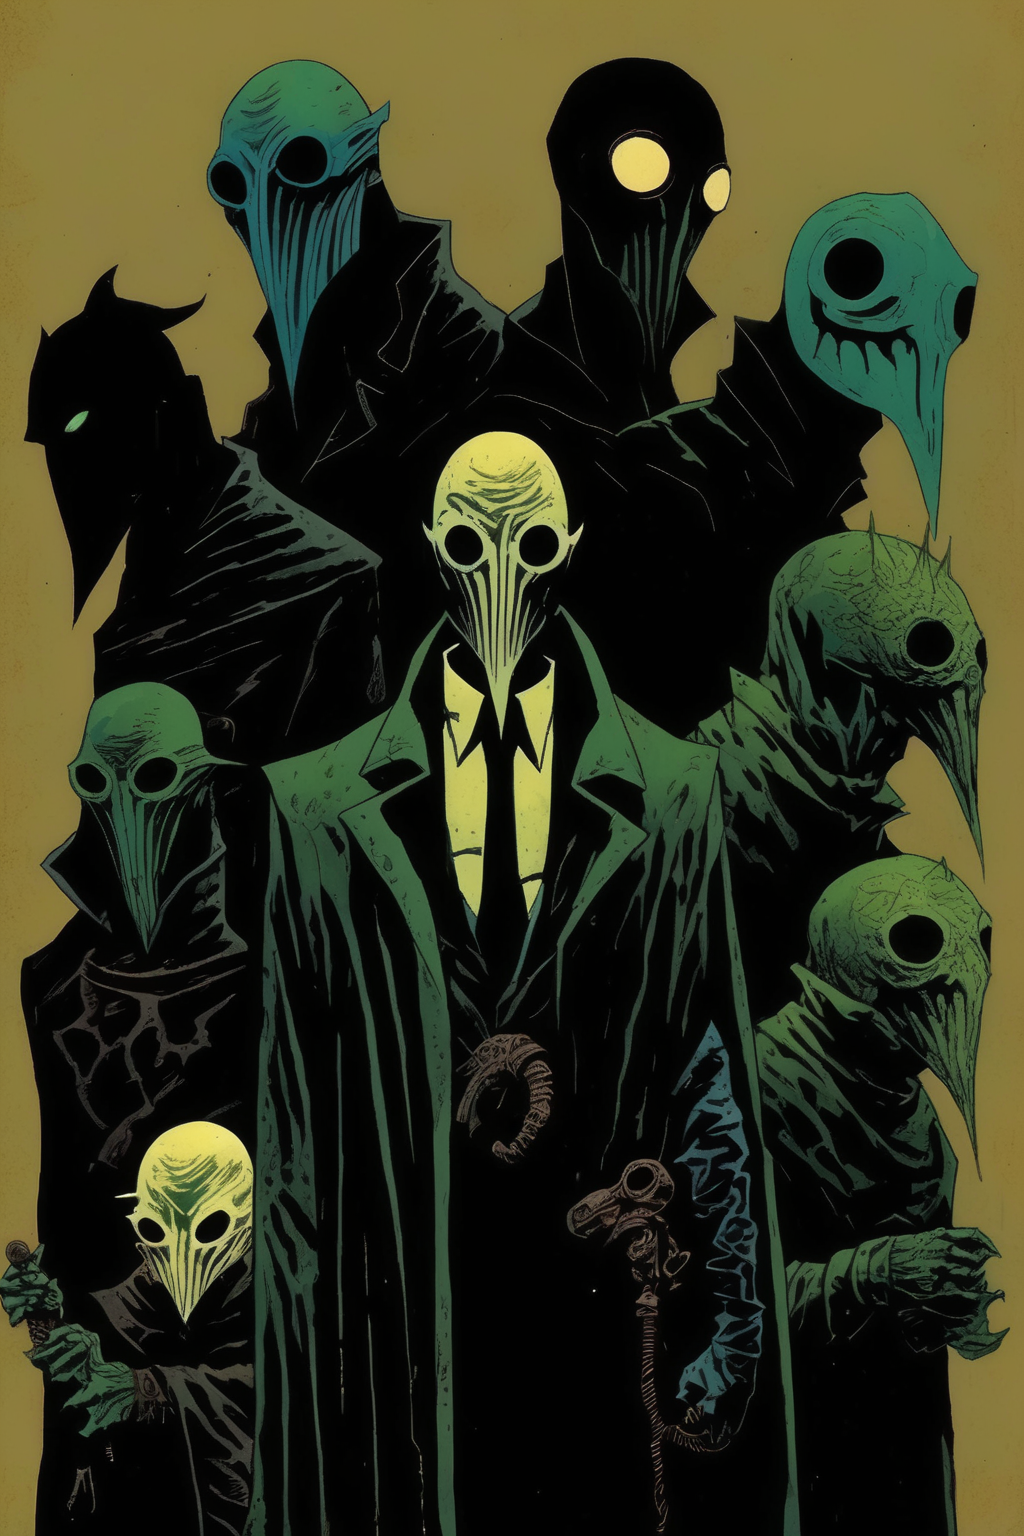 Mike Mignola Style - The eldritch lords of masks